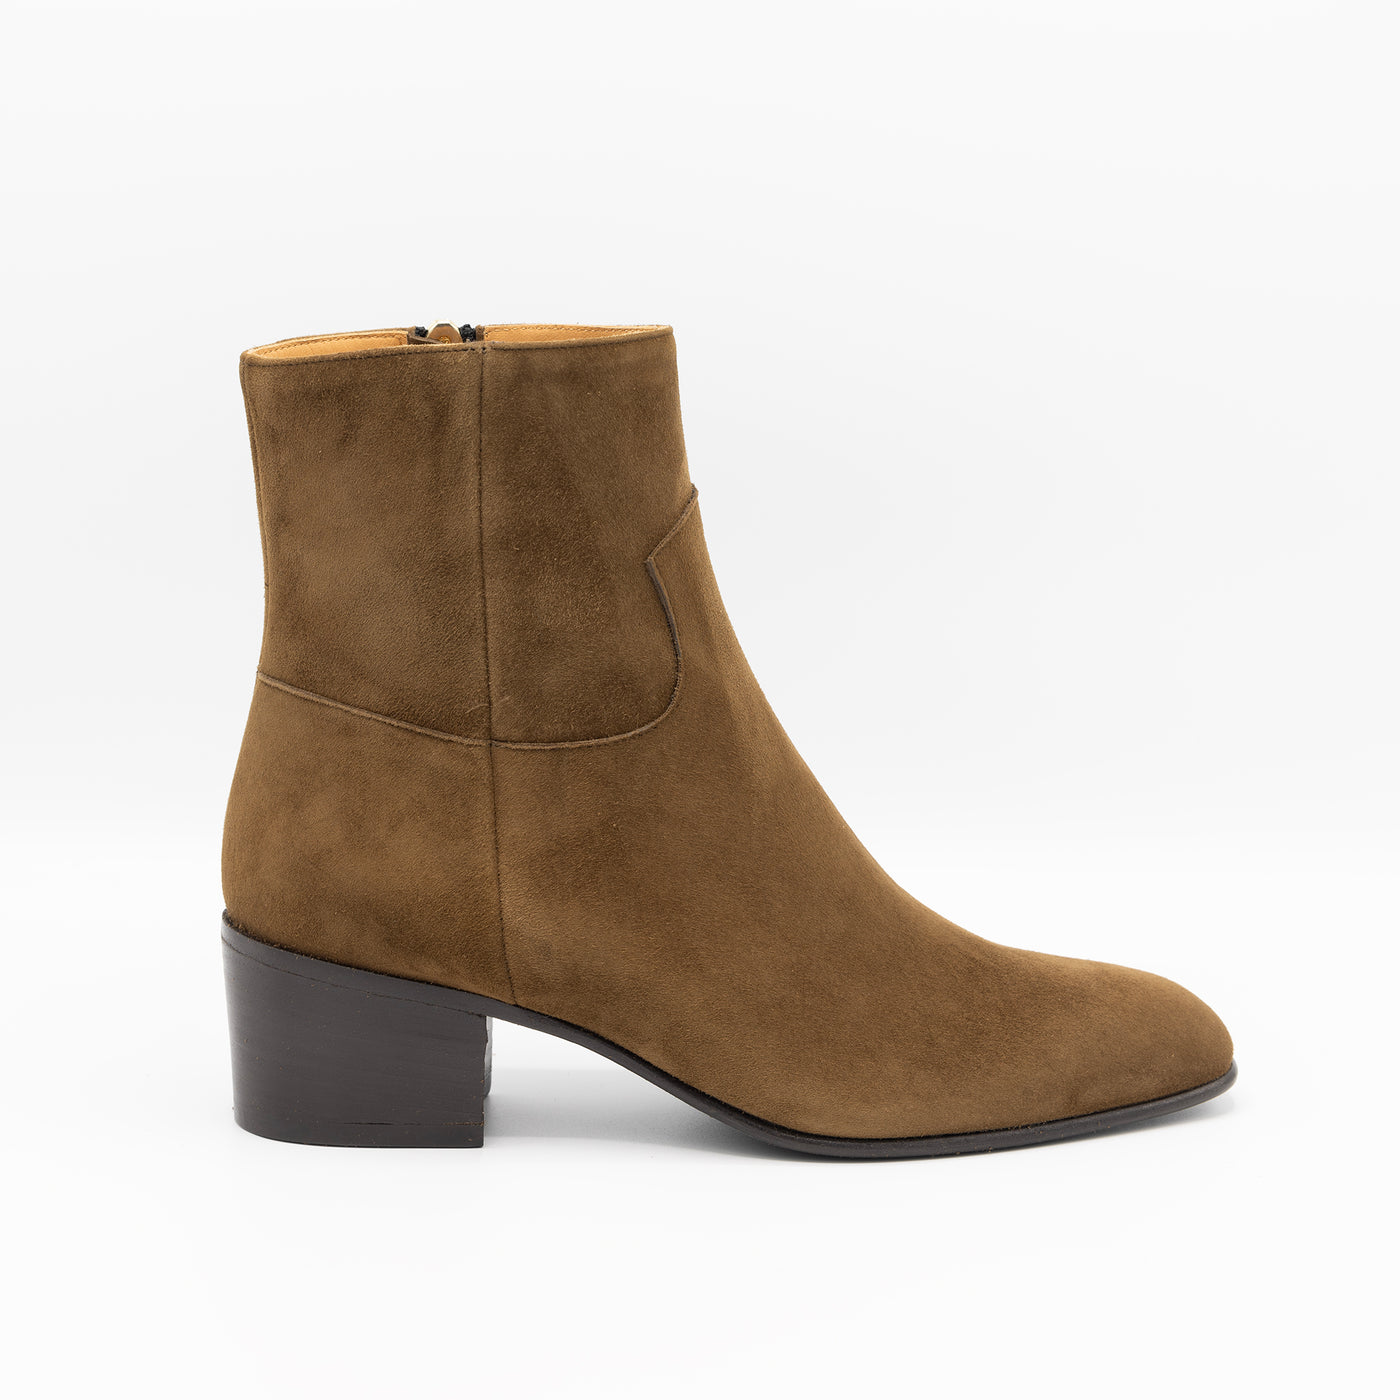 Ankle boots in cognac suede with block heel and almond toe. 